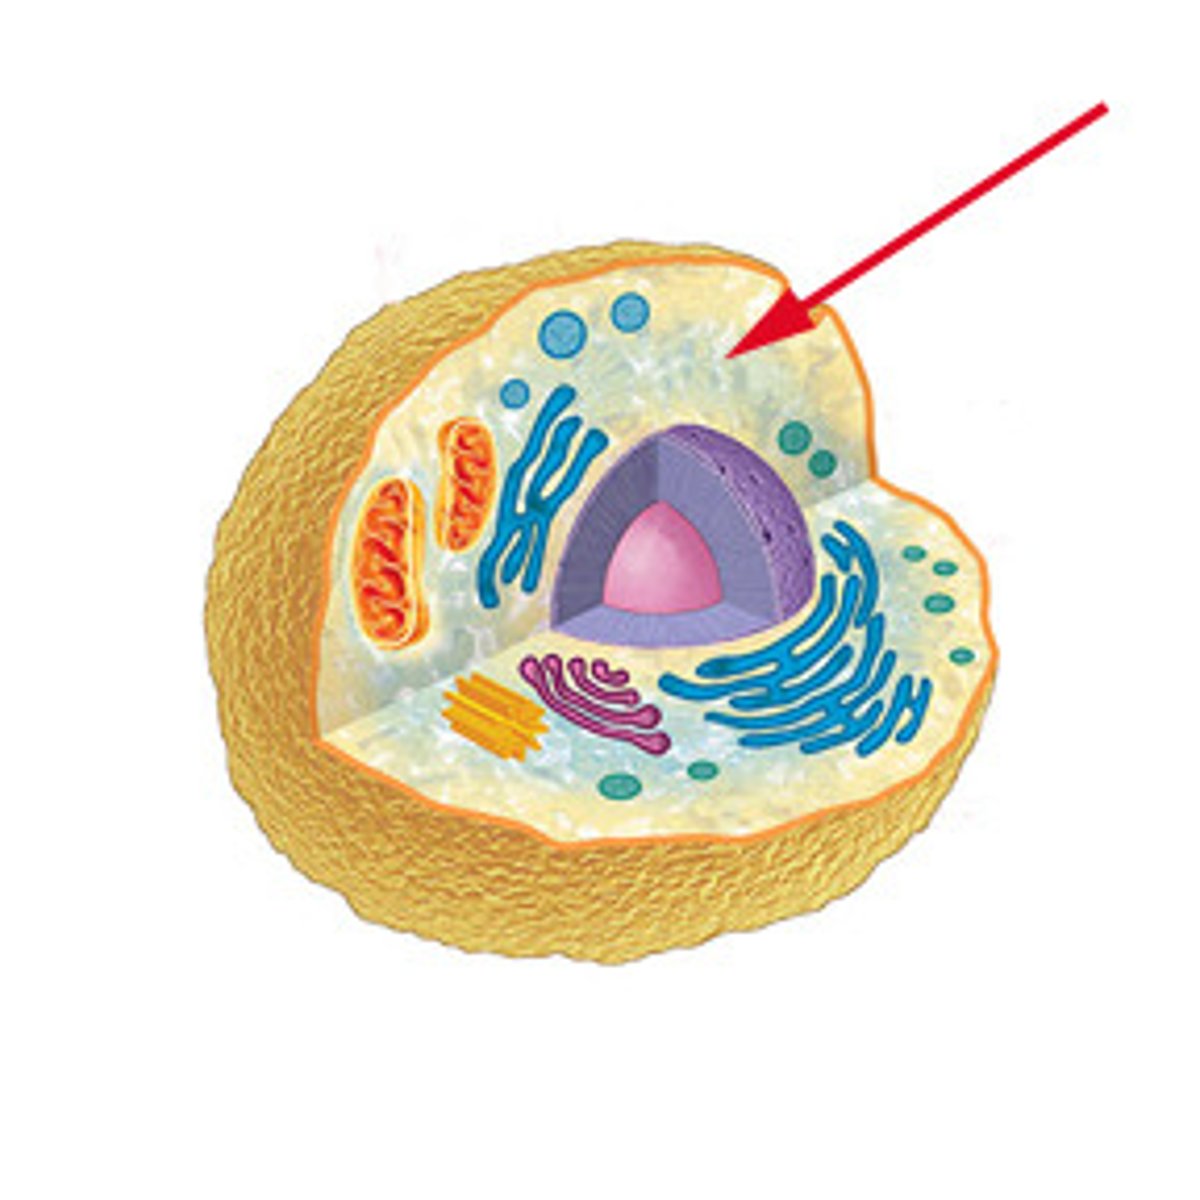 <p>Structure:</p><p>-jelly-like material that is 80% water</p><p>-contains Proteins, Lipids, and Carbohydrates</p><p>Function:</p><p>- gives shape to the cell</p><p>- holds organelles</p><p>-gives shape &structure to cells</p>